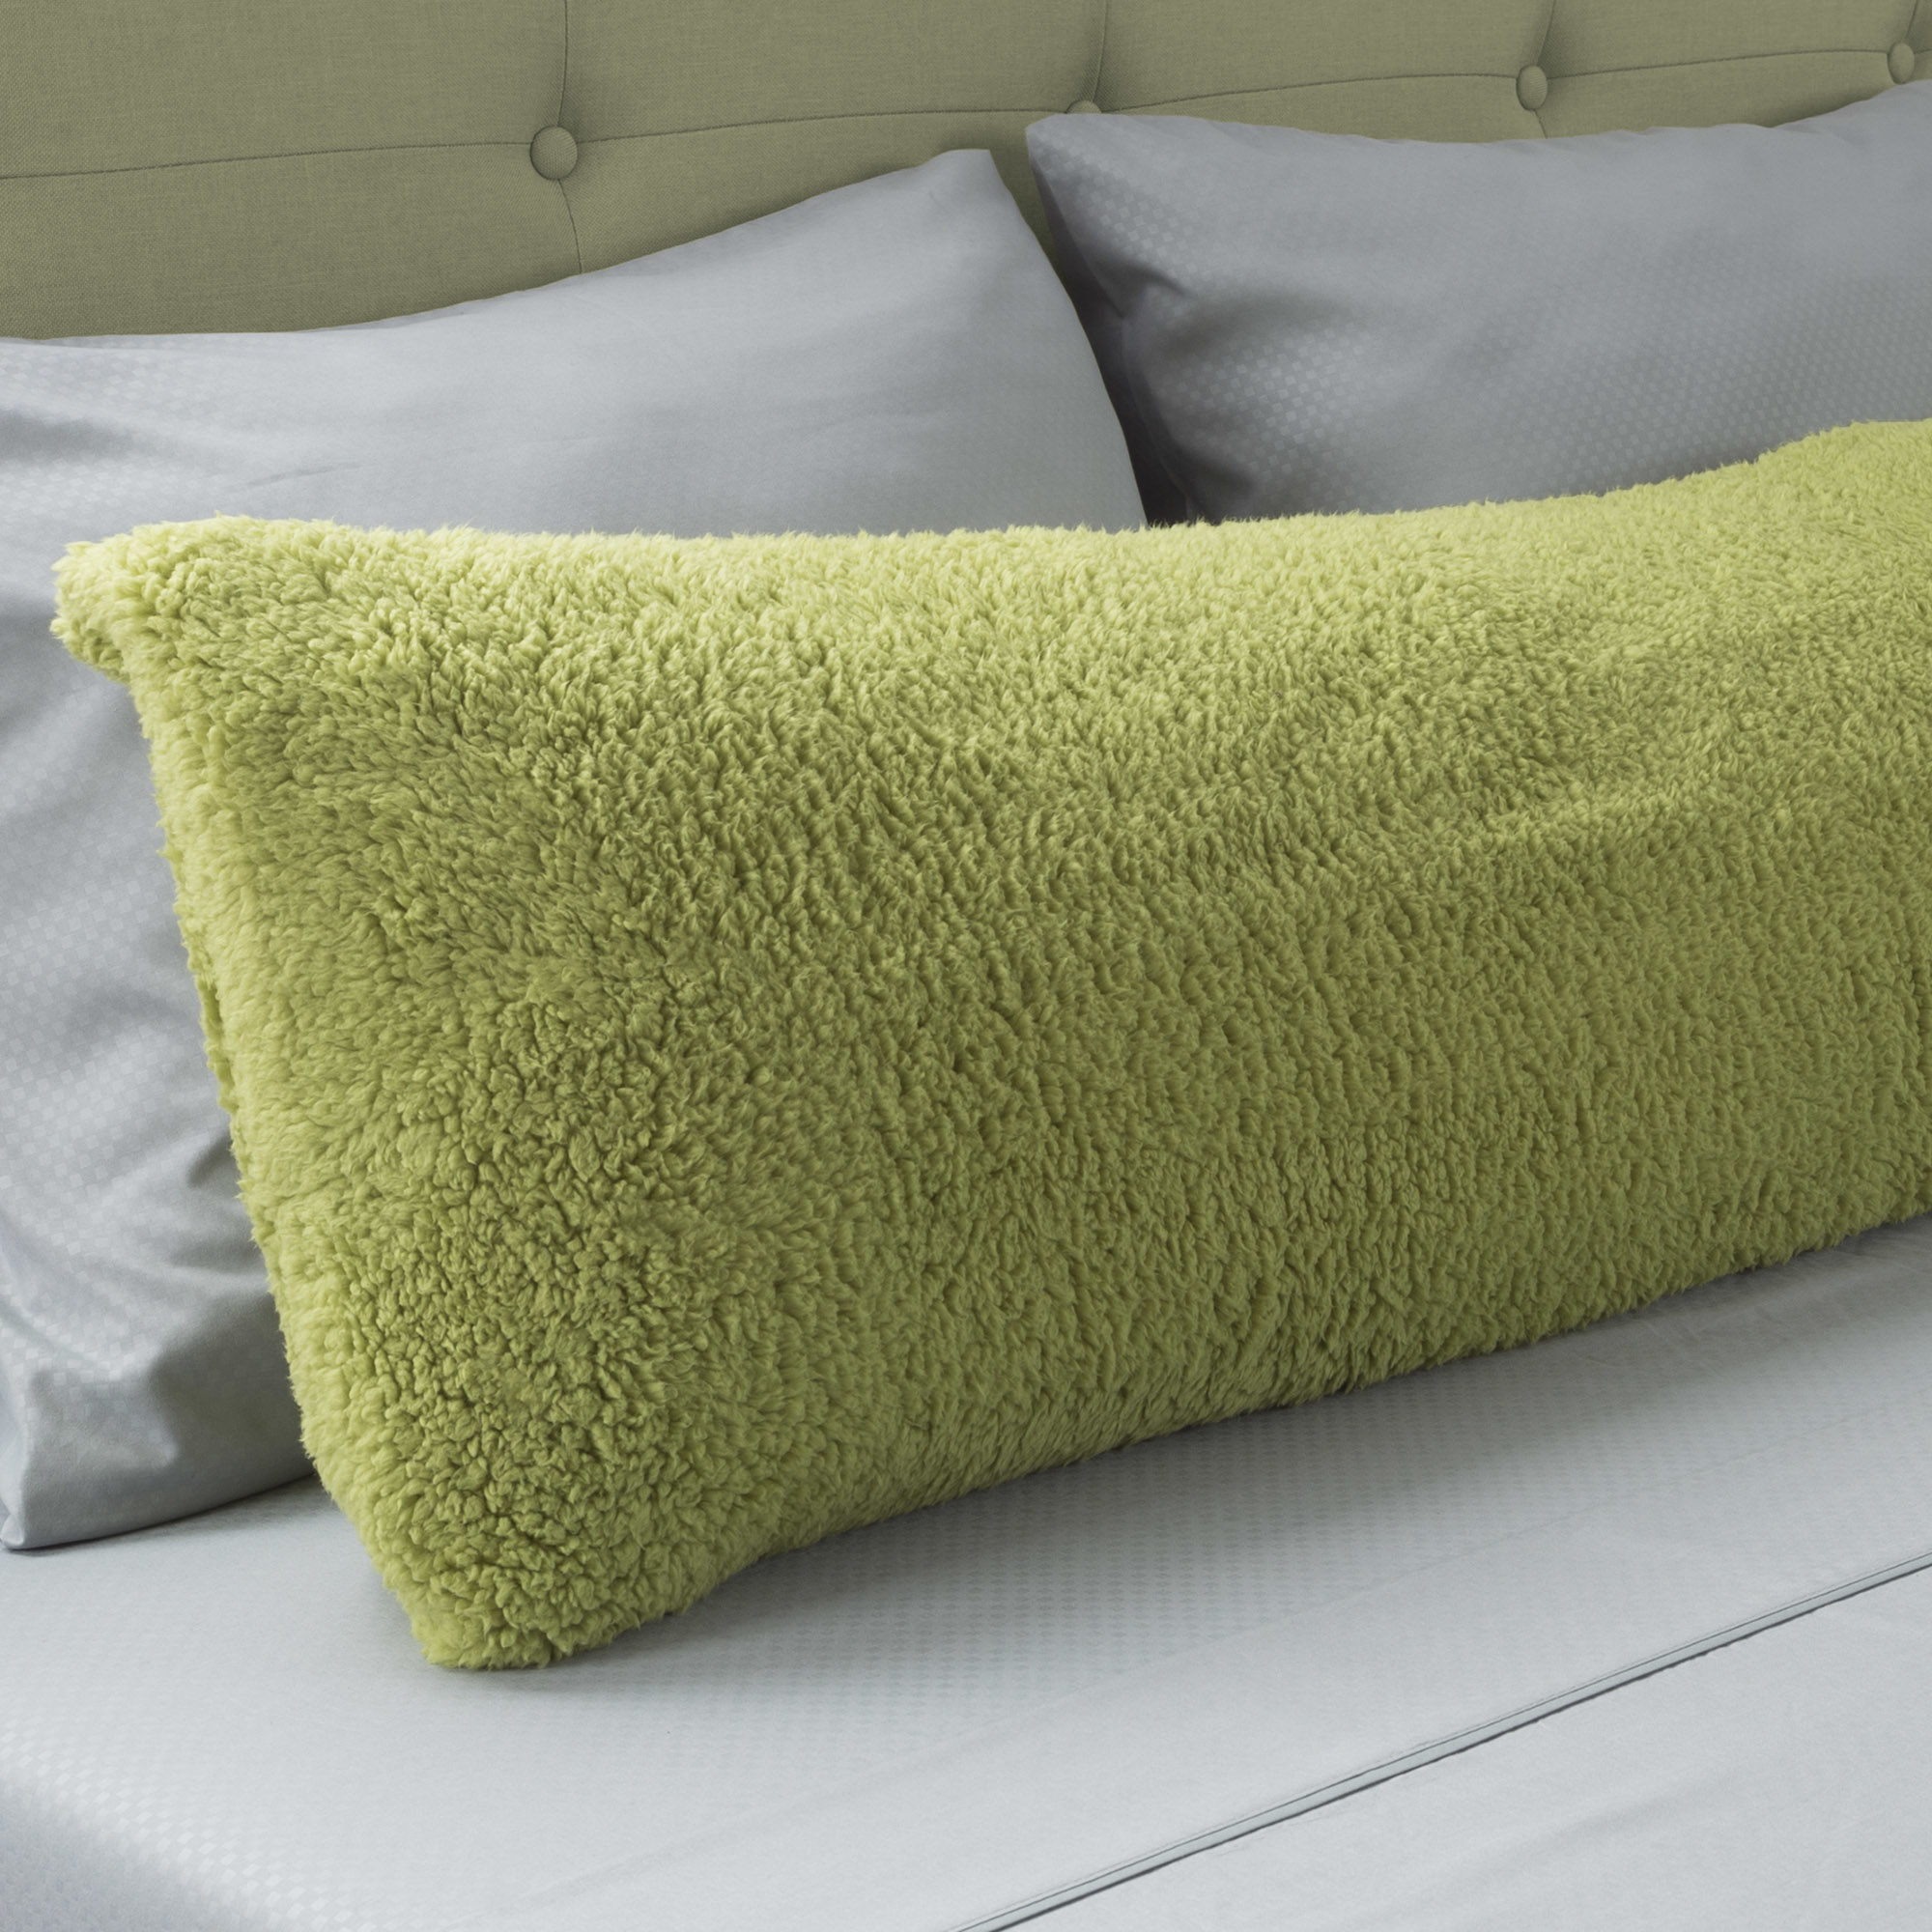 Warm Body Pillow Cover Soft Comfy Pillow Case Zippered Washable 52 X 18 Inches Pistachio